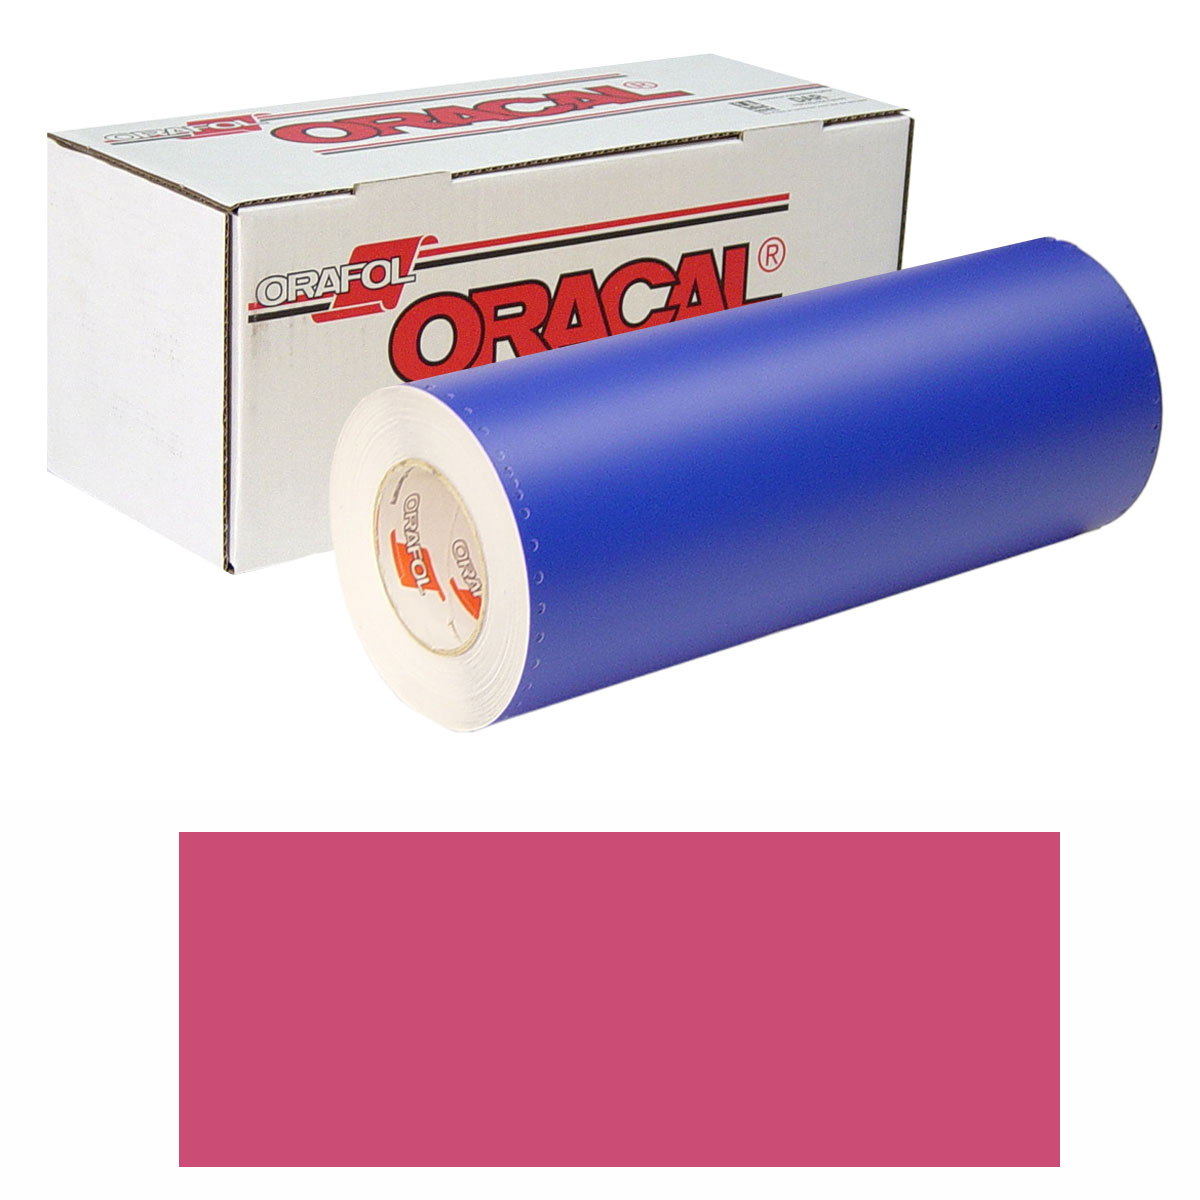 ORACAL 8300 15in X 10yd 031 Red